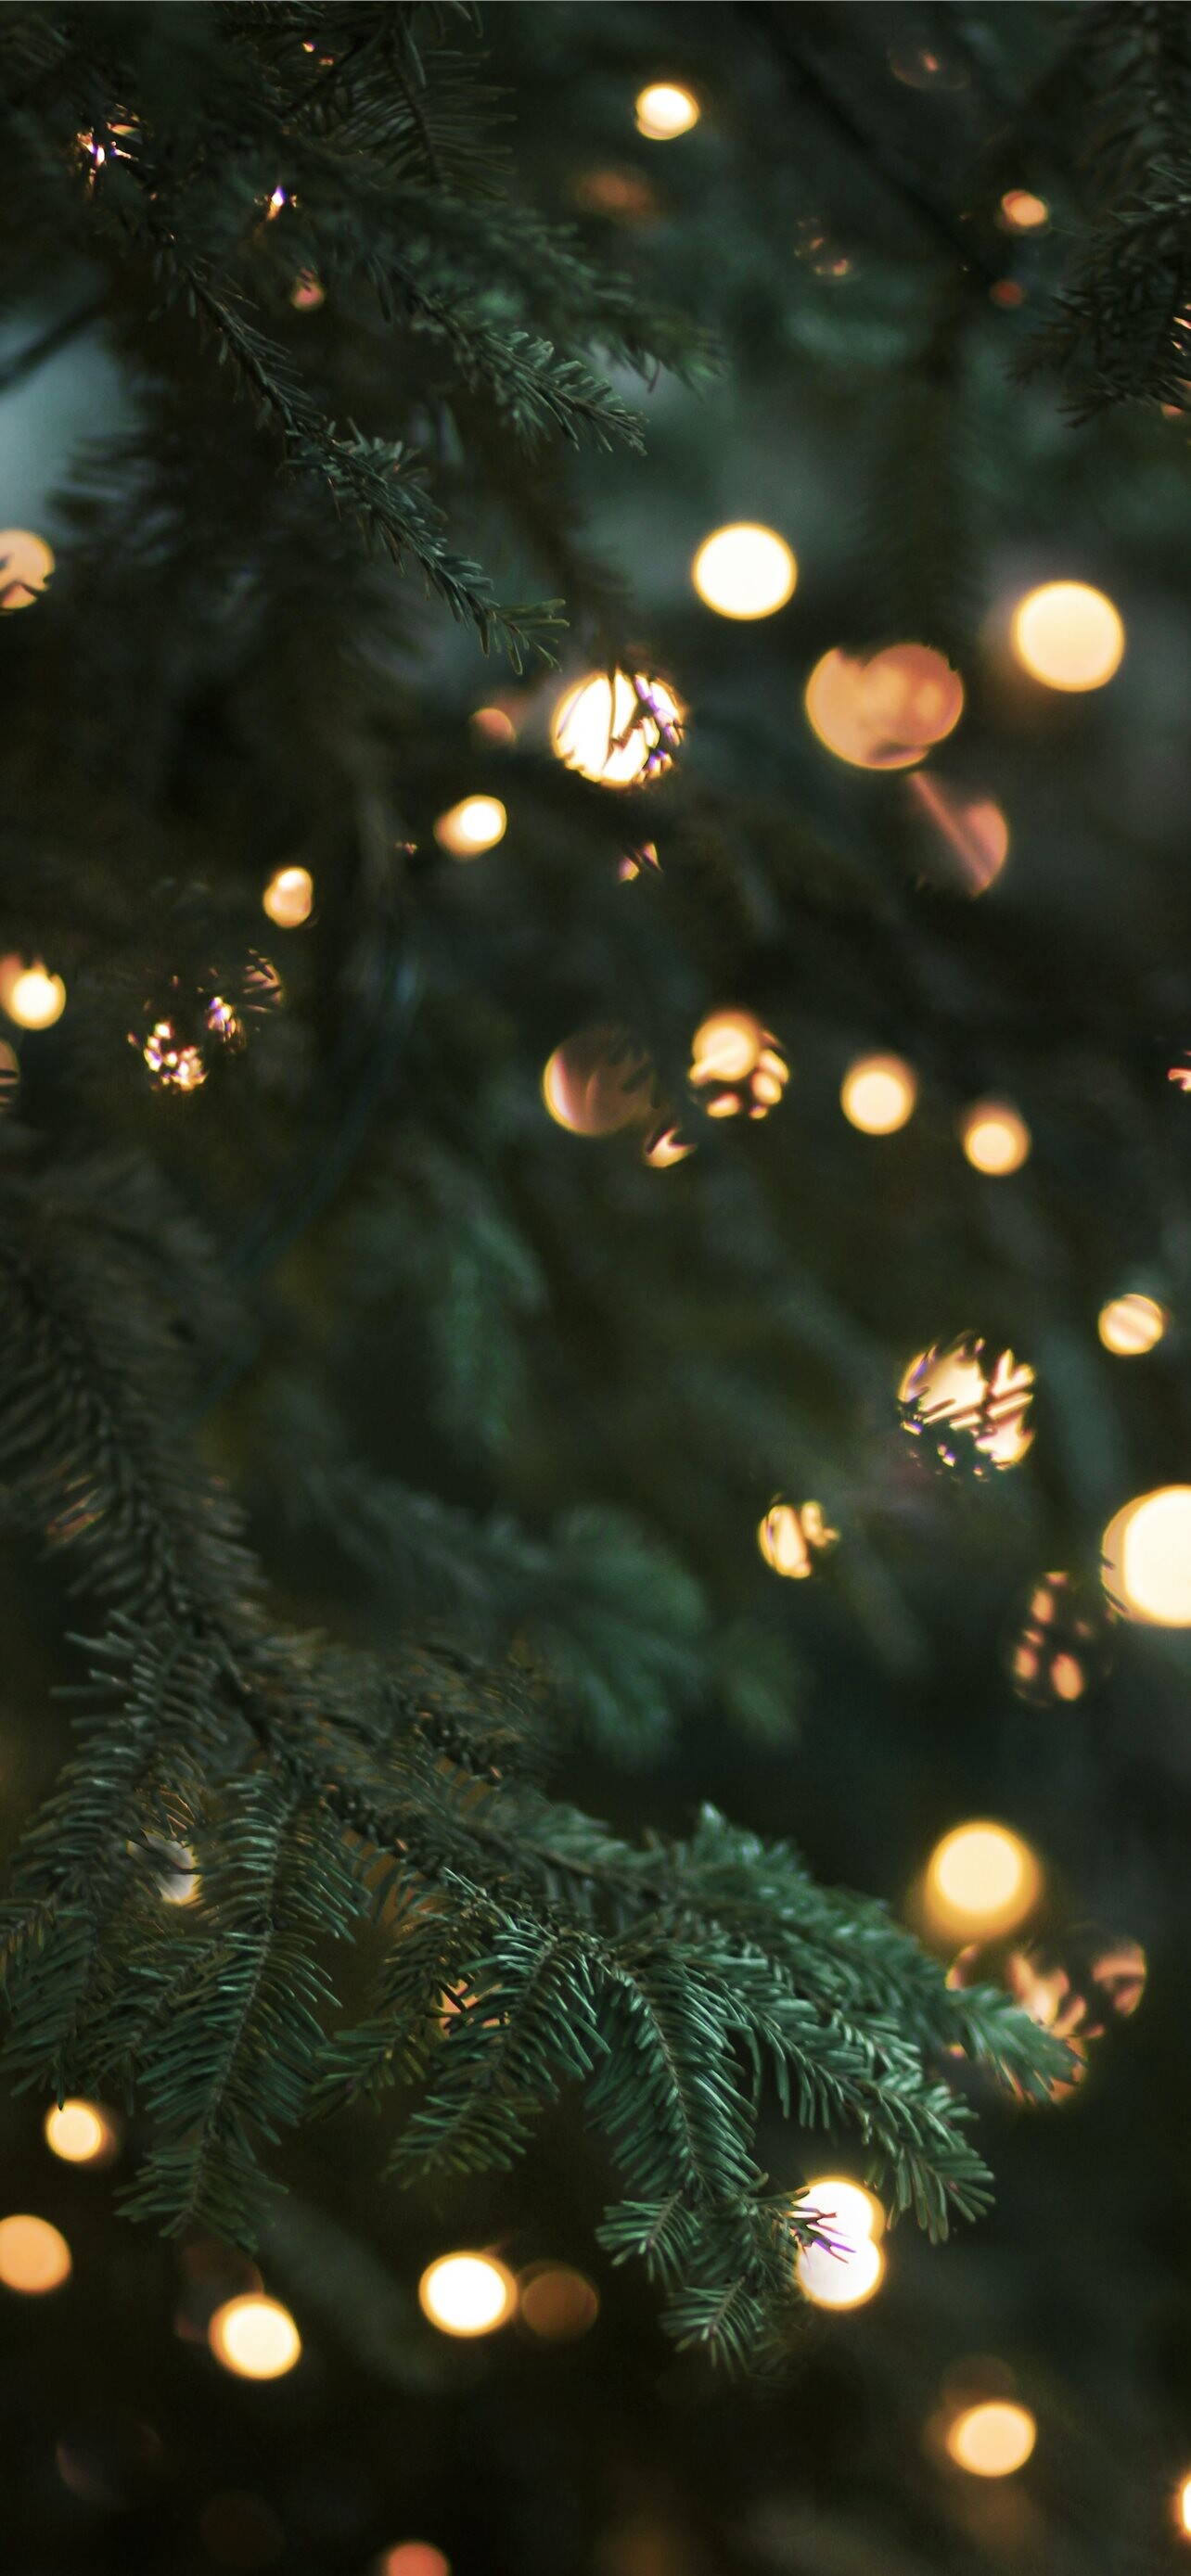 Gold Lights: A natural Christmas decor with pine branches, Christmas blurred decorative holiday lights. 1290x2780 HD Wallpaper.